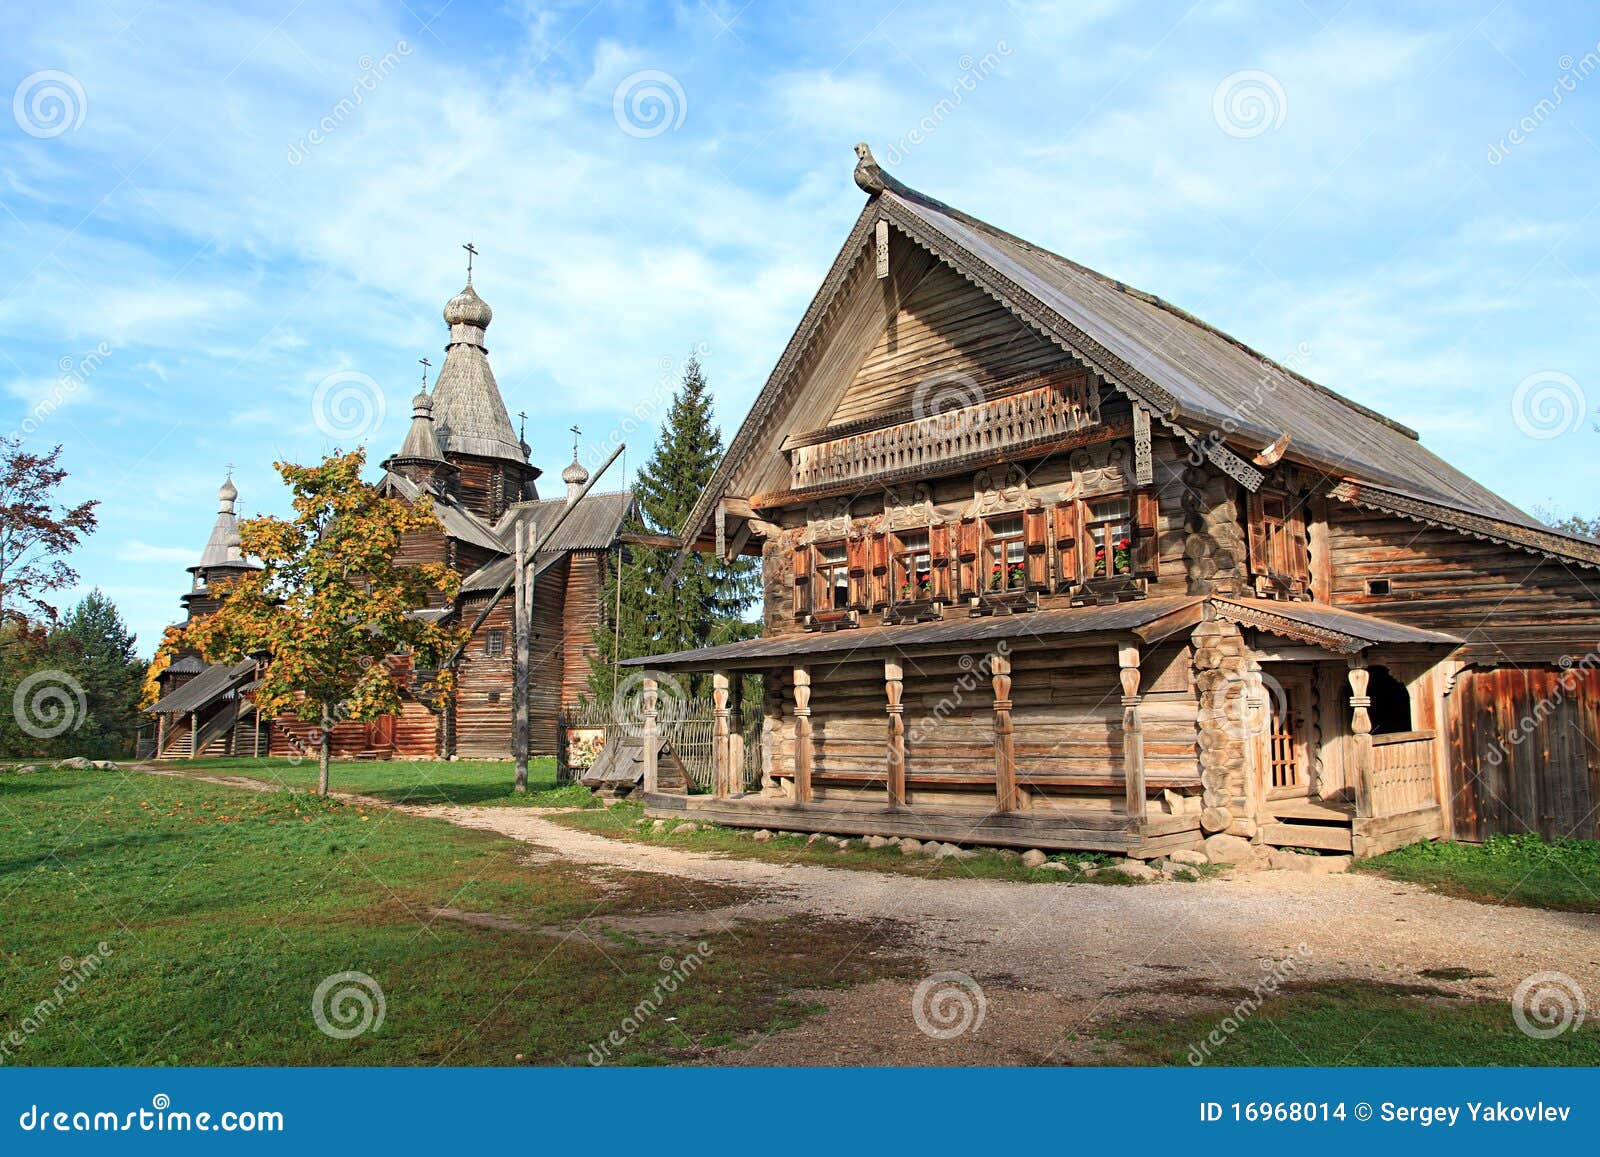 House in village stock photo. Image of remote, obsolete - 16968014